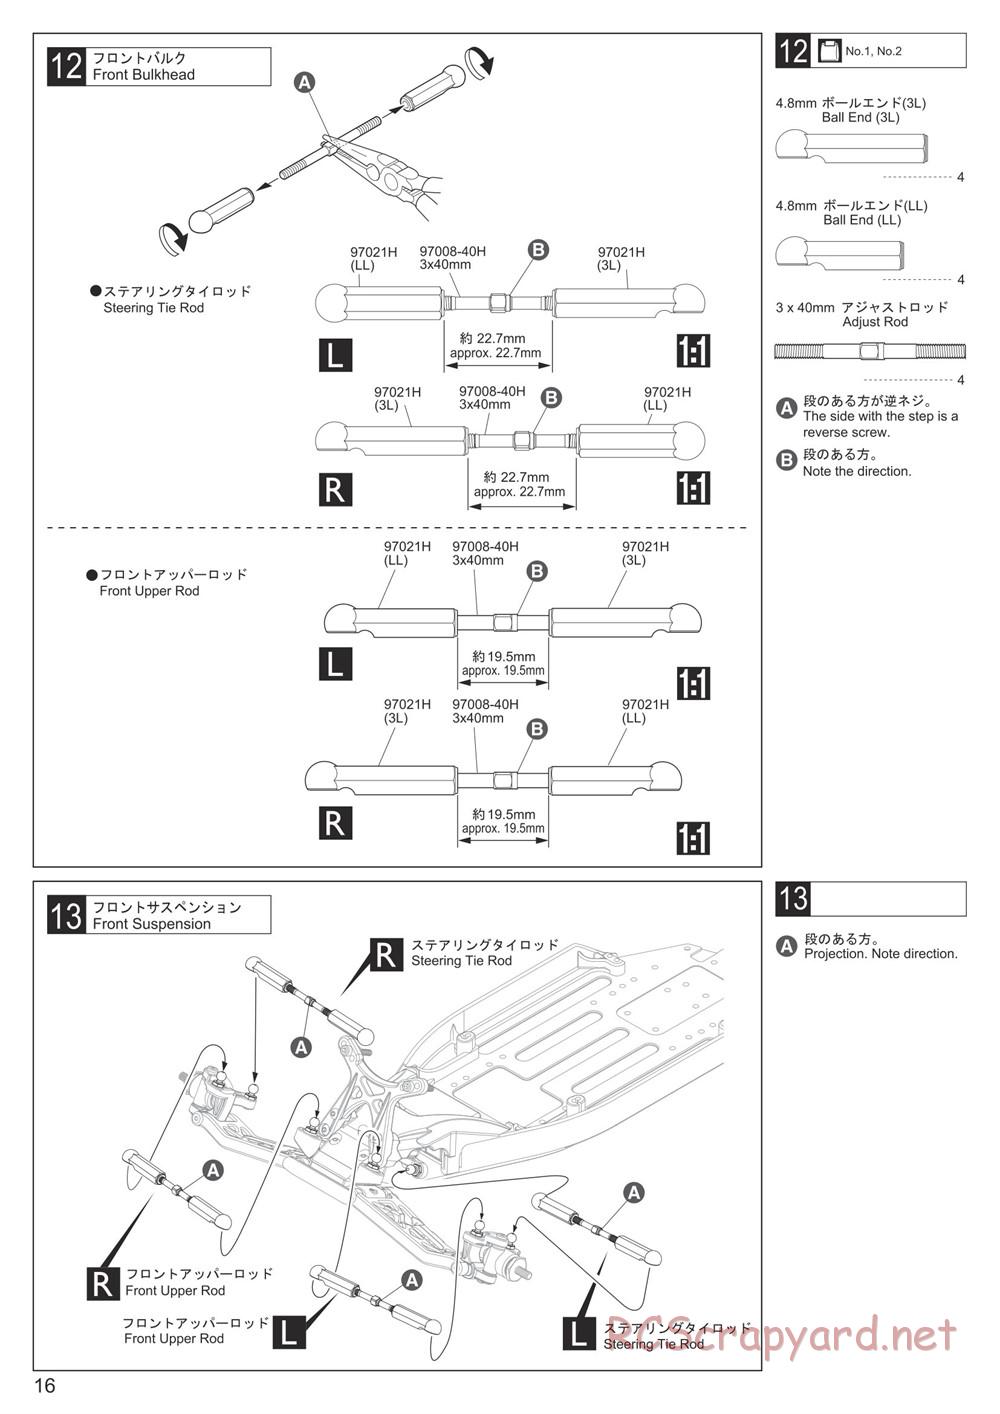 Kyosho - Ultima RB7 - Manual - Page 16